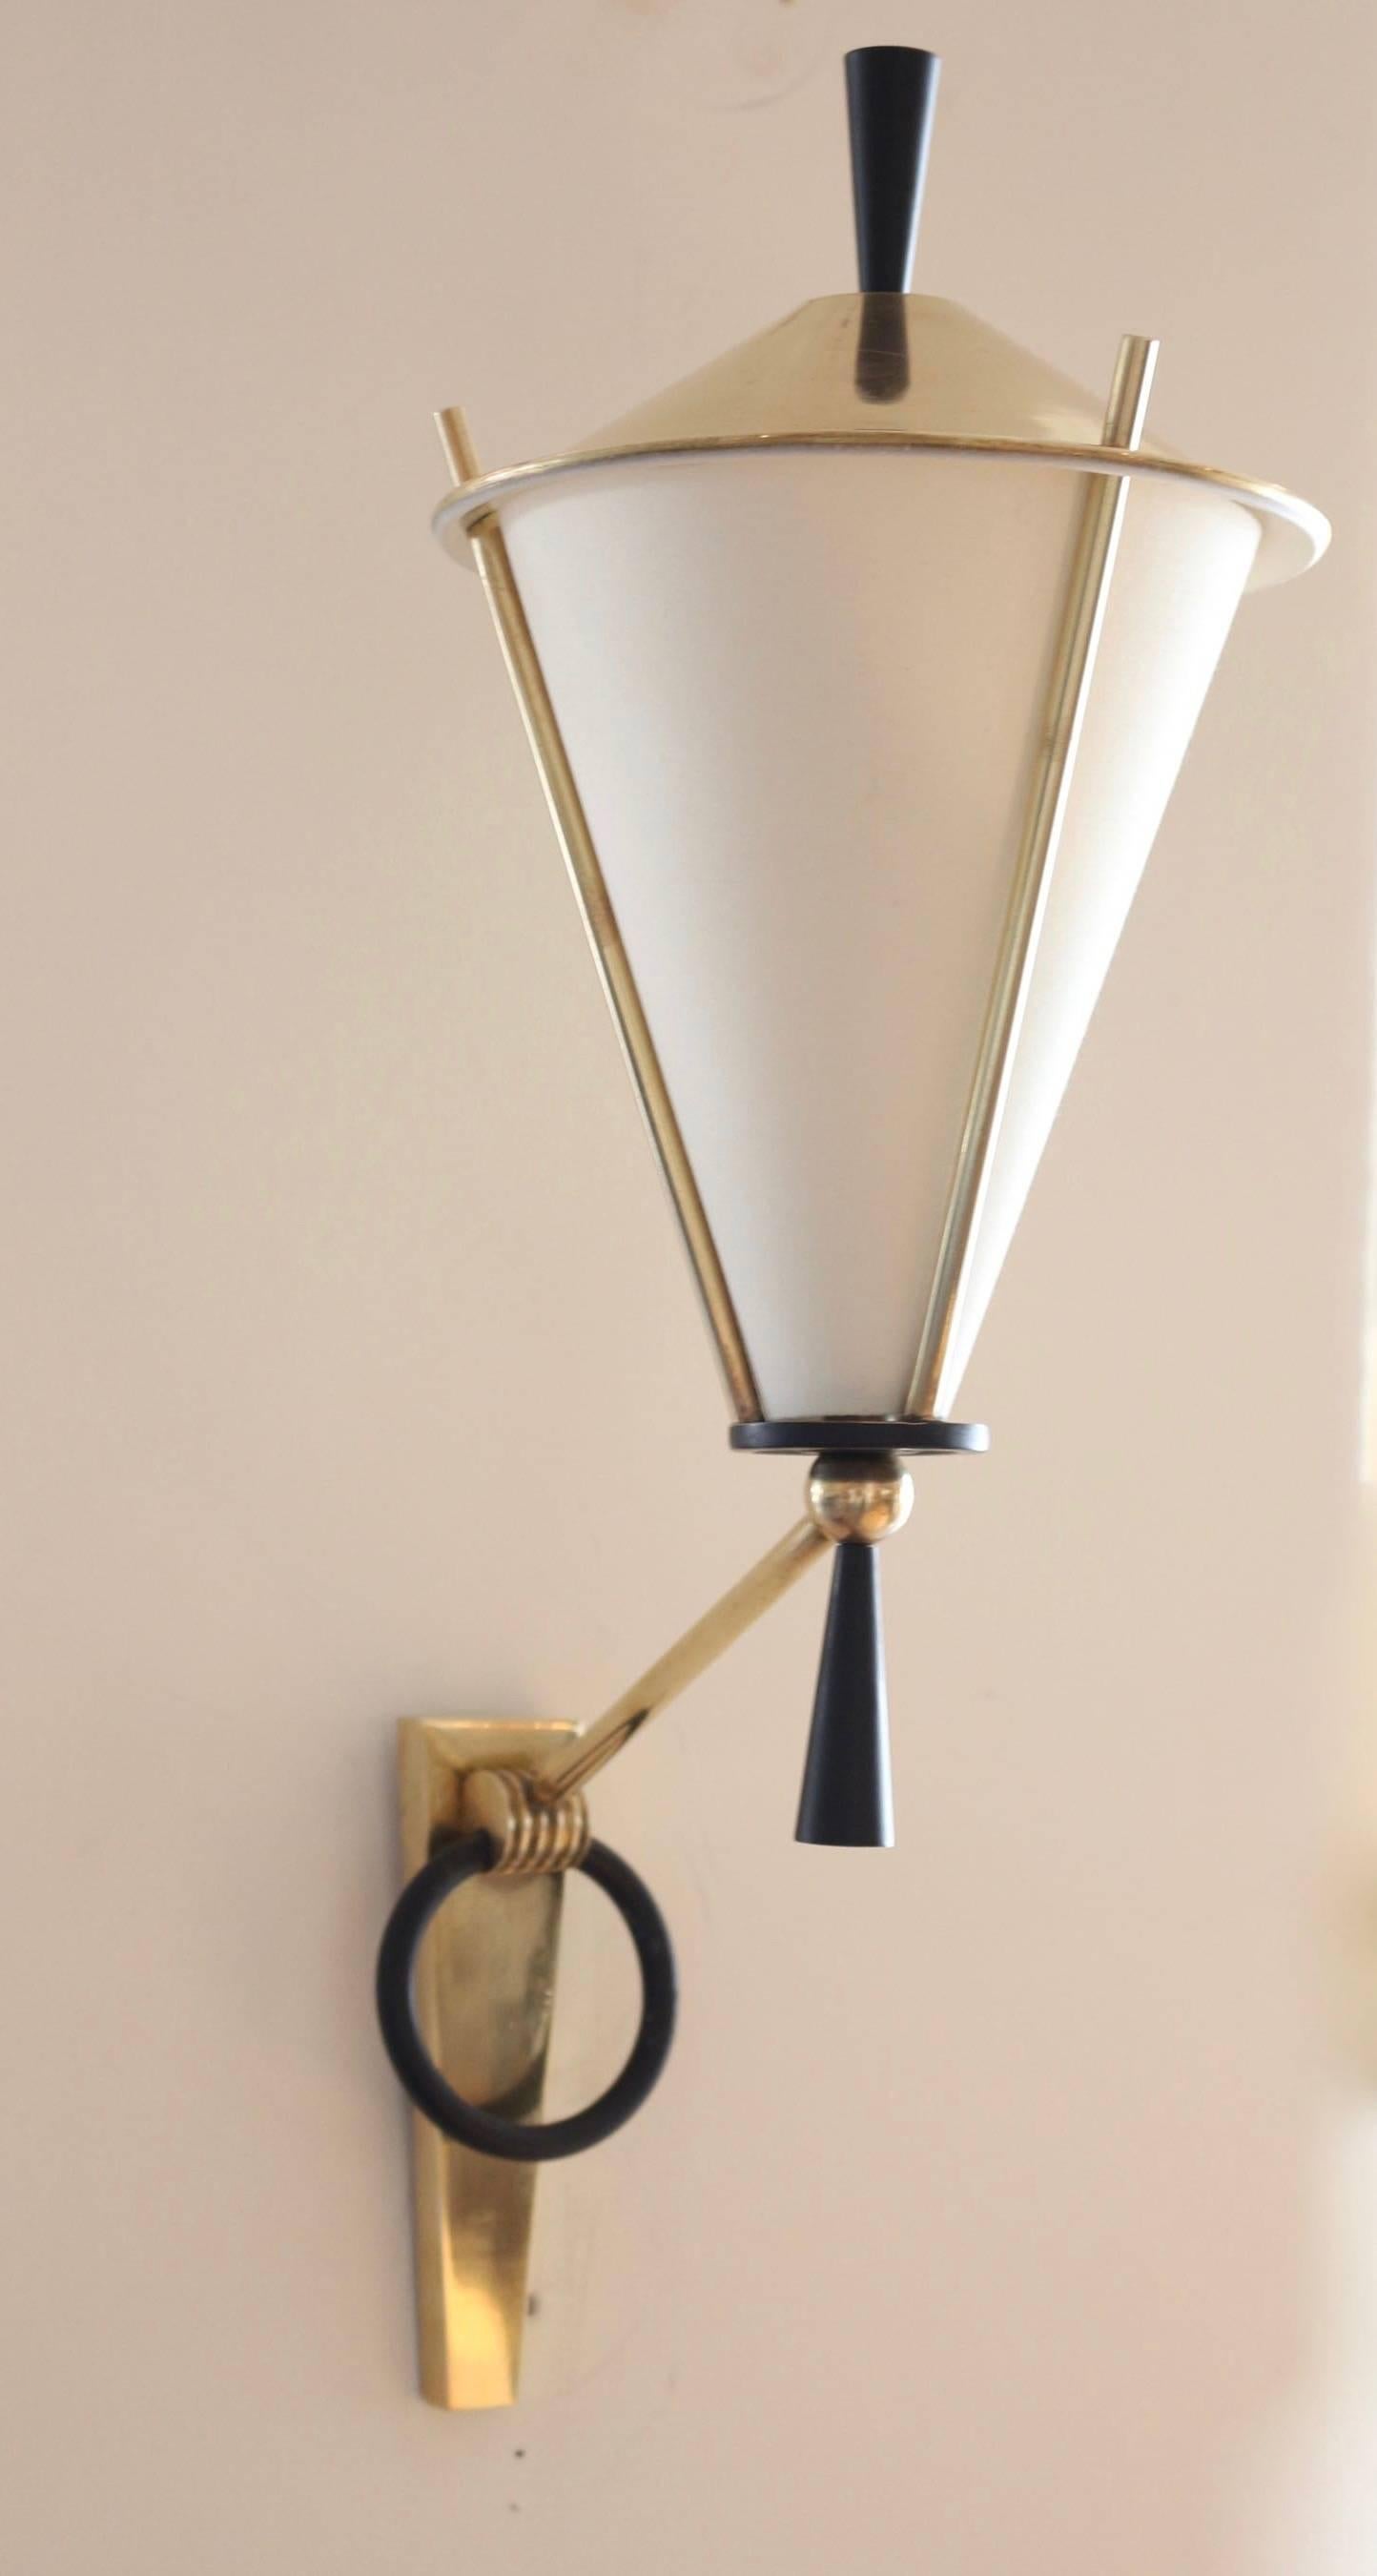 Set of three 1950s sconces by Maison Arlus.
A pair of Each sconce consists of two lighted arms set on trapezoidal a gilt brass plate decorated with a blackened brass ring.
The third lantern like sconce completes the set.